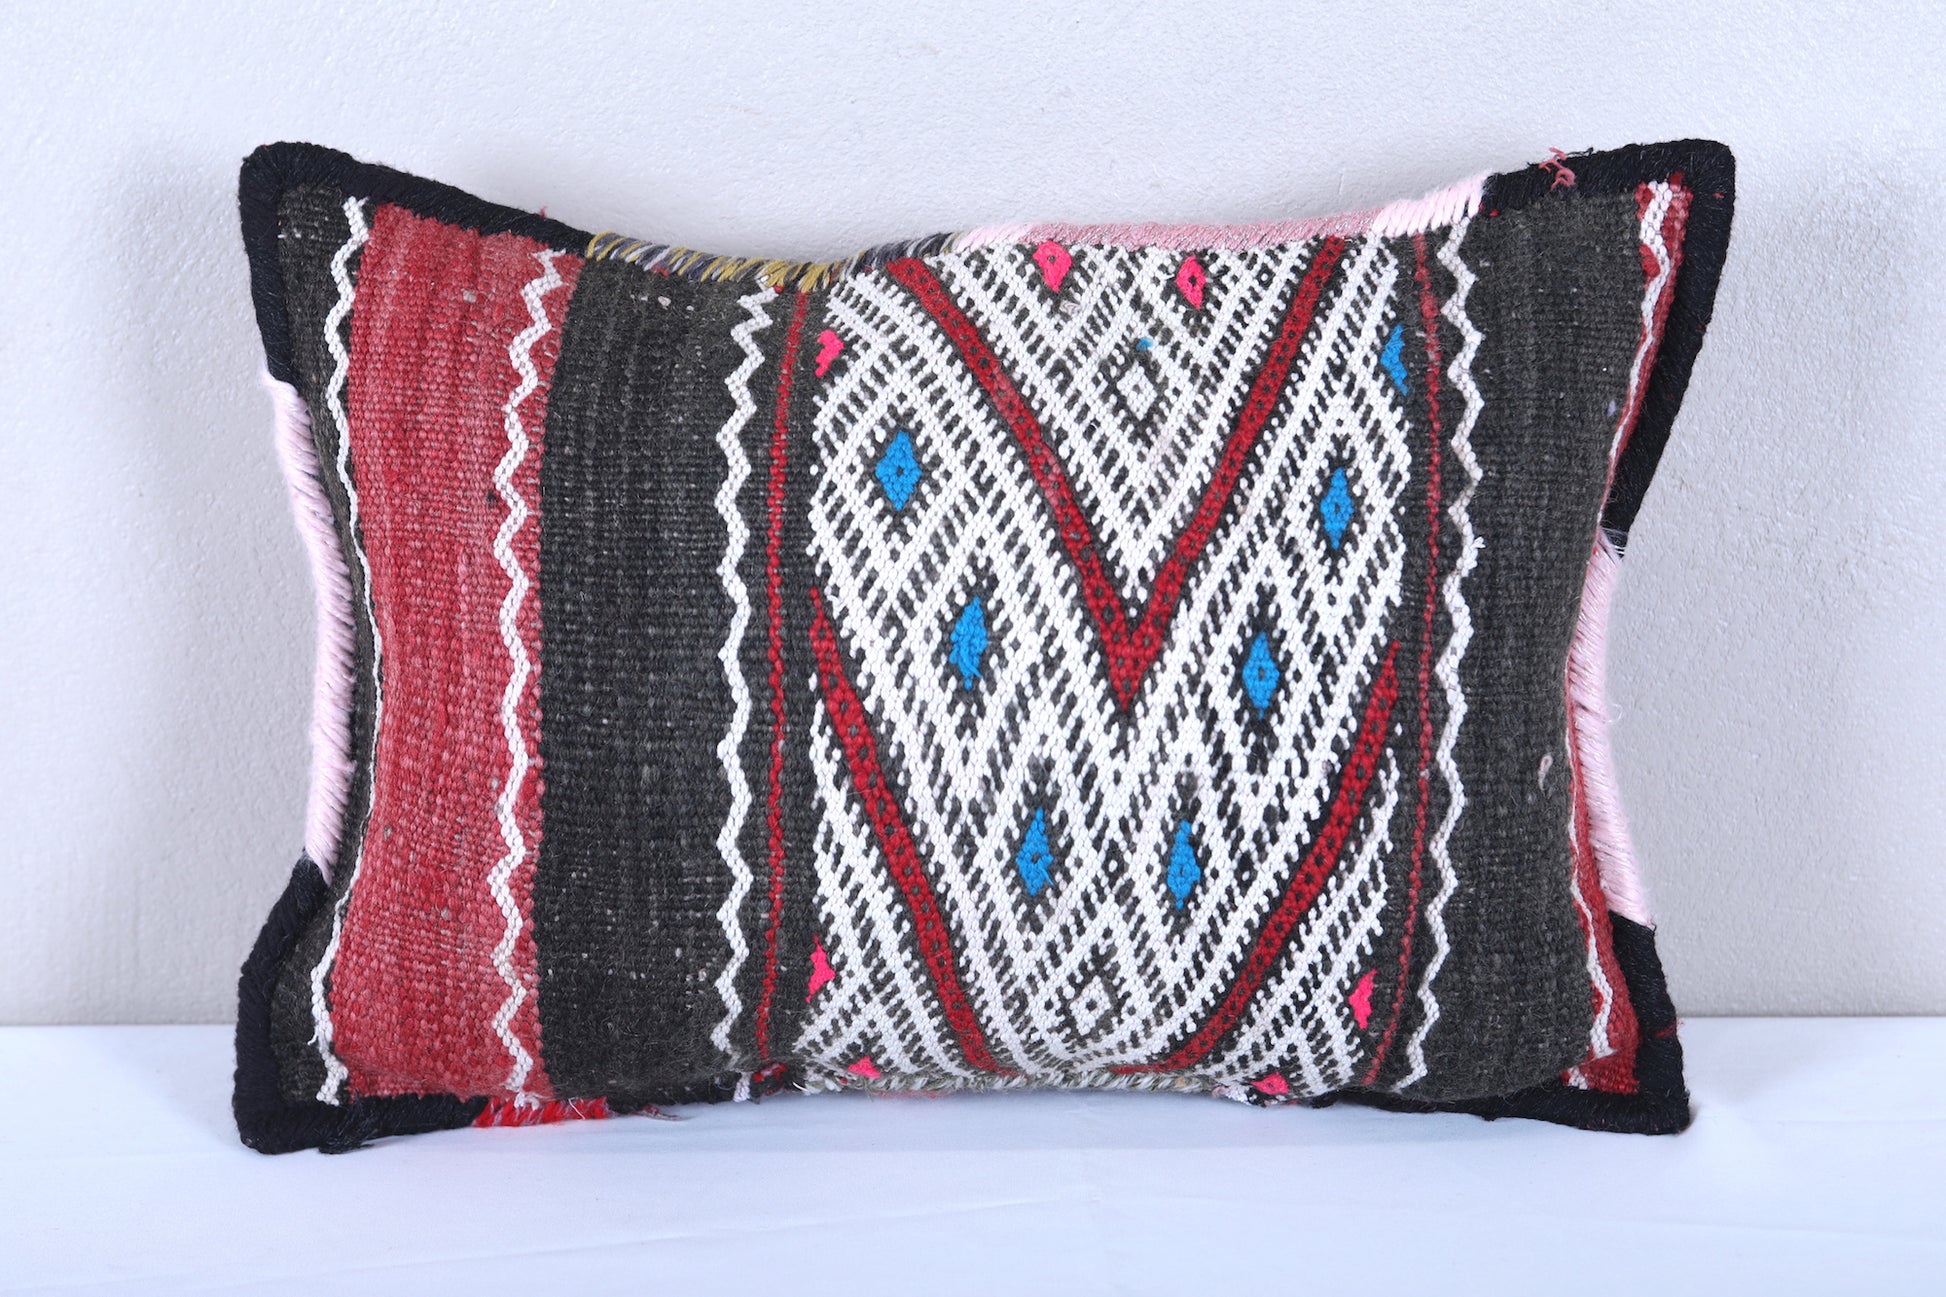 Vintage moroccan handwoven kilim pillow 13.7 INCHES X 18.8 INCHES